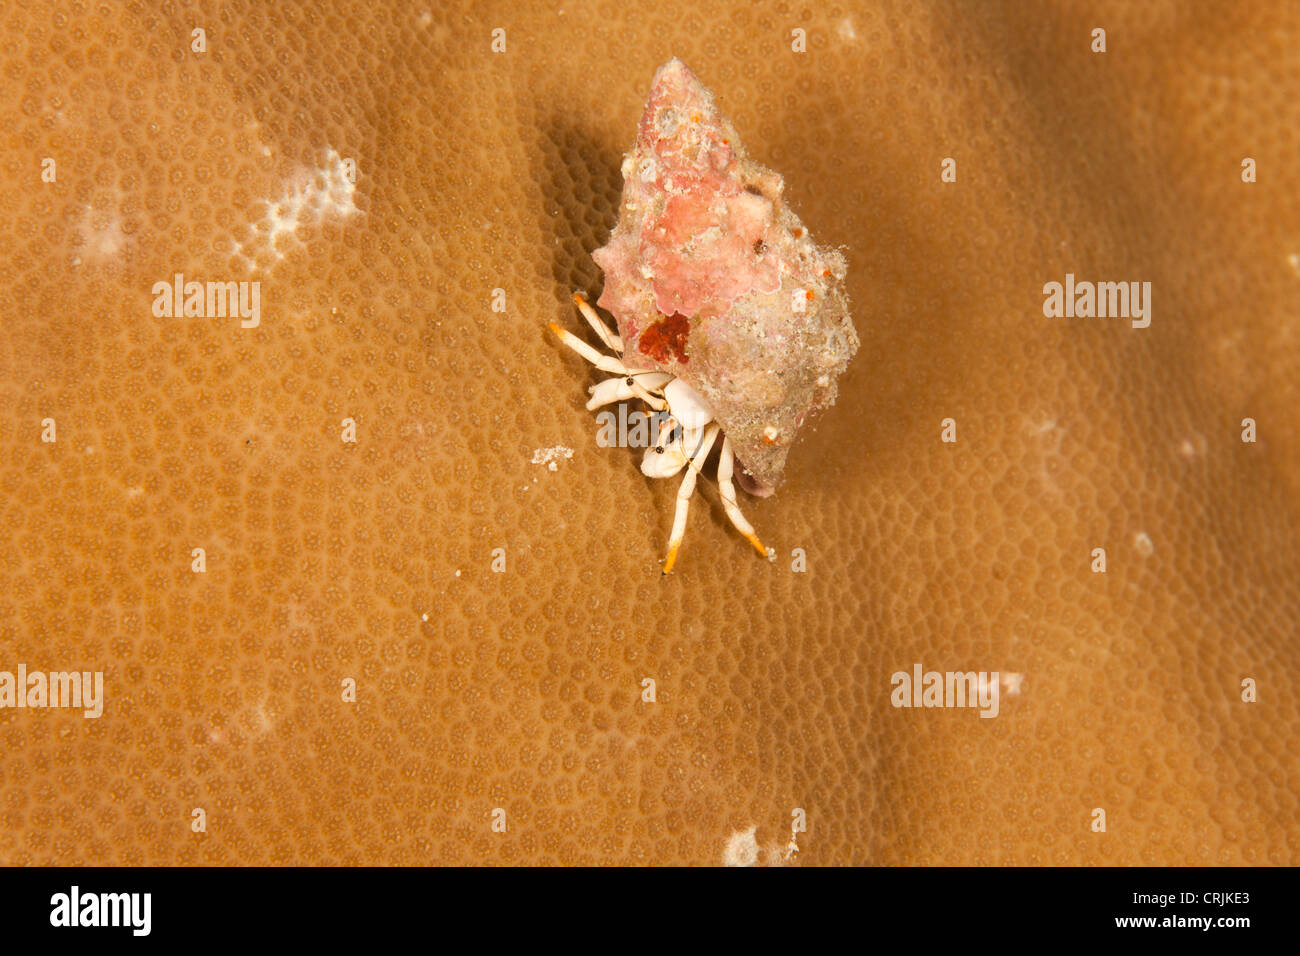 Small White Hermit Crab (Calcinus minutus) on a tropical coral reef off the island of Palau in Micronesia. Stock Photo